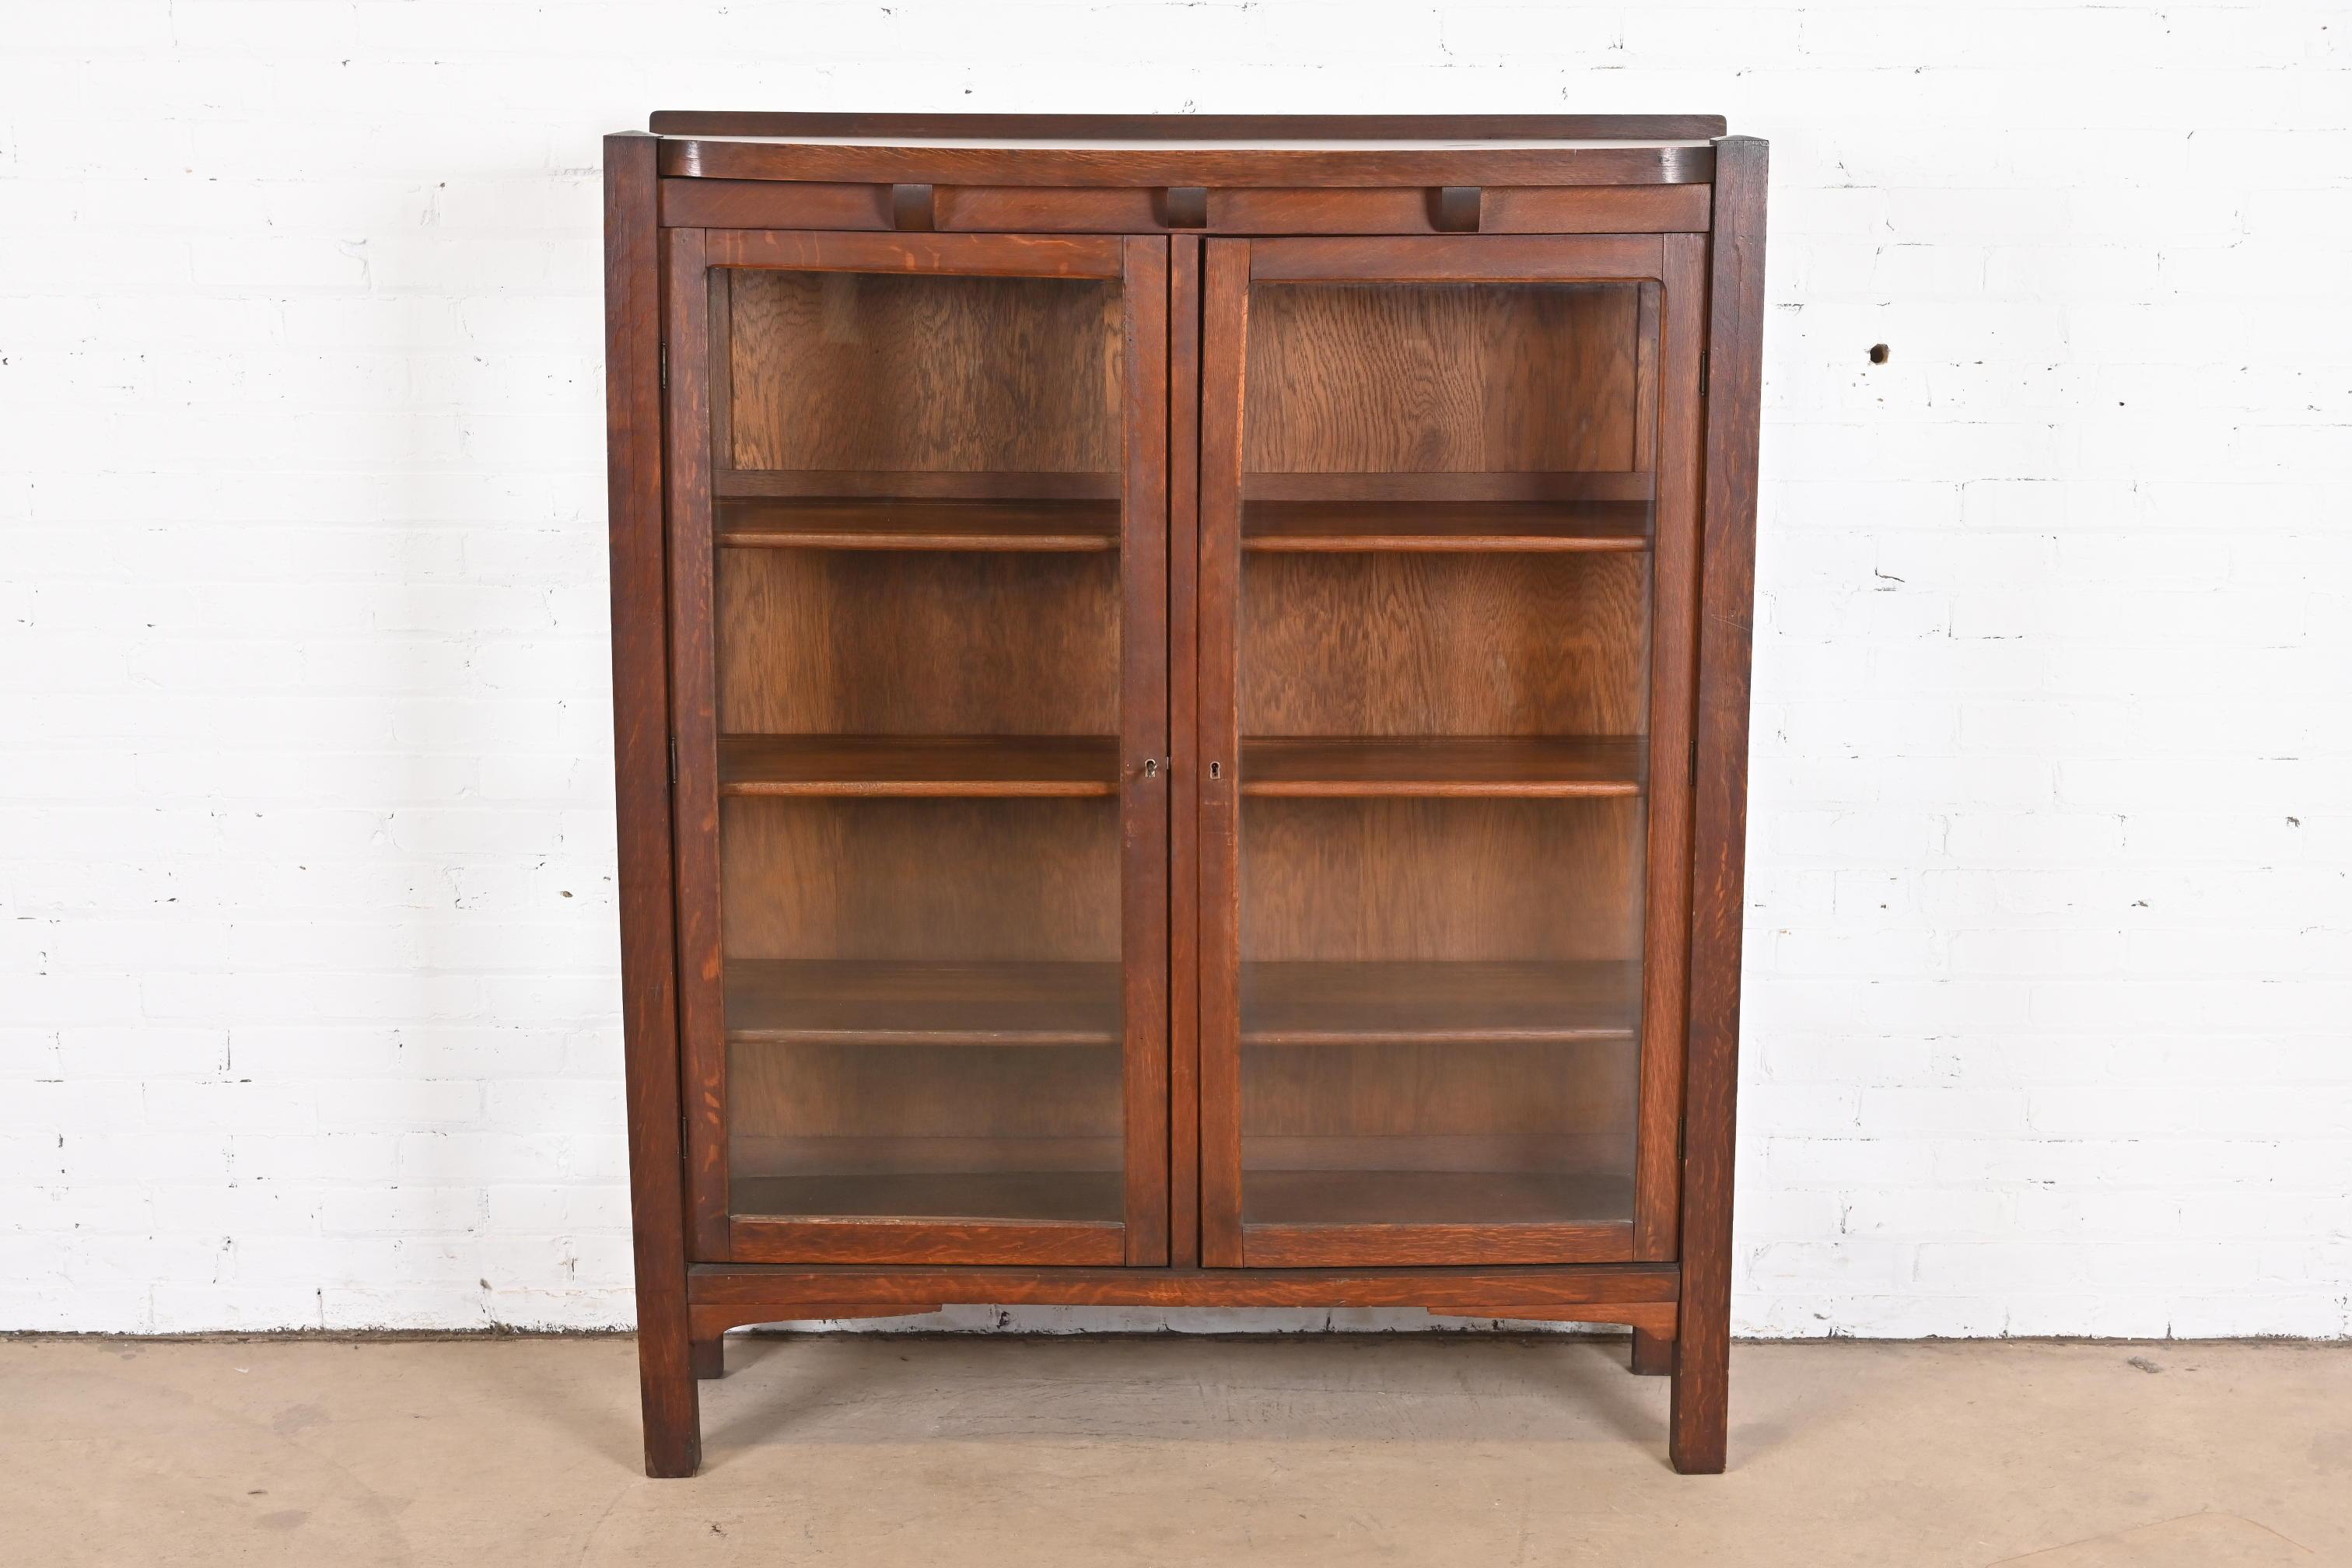 A gorgeous antique Mission oak Arts & Crafts bookcase, display cabinet, or china cabinet

In the manner of Stickley

USA, Circa 1900

Oak, with glass doors and sides. Cabinets lock, and key is included.

Measures: 48.75